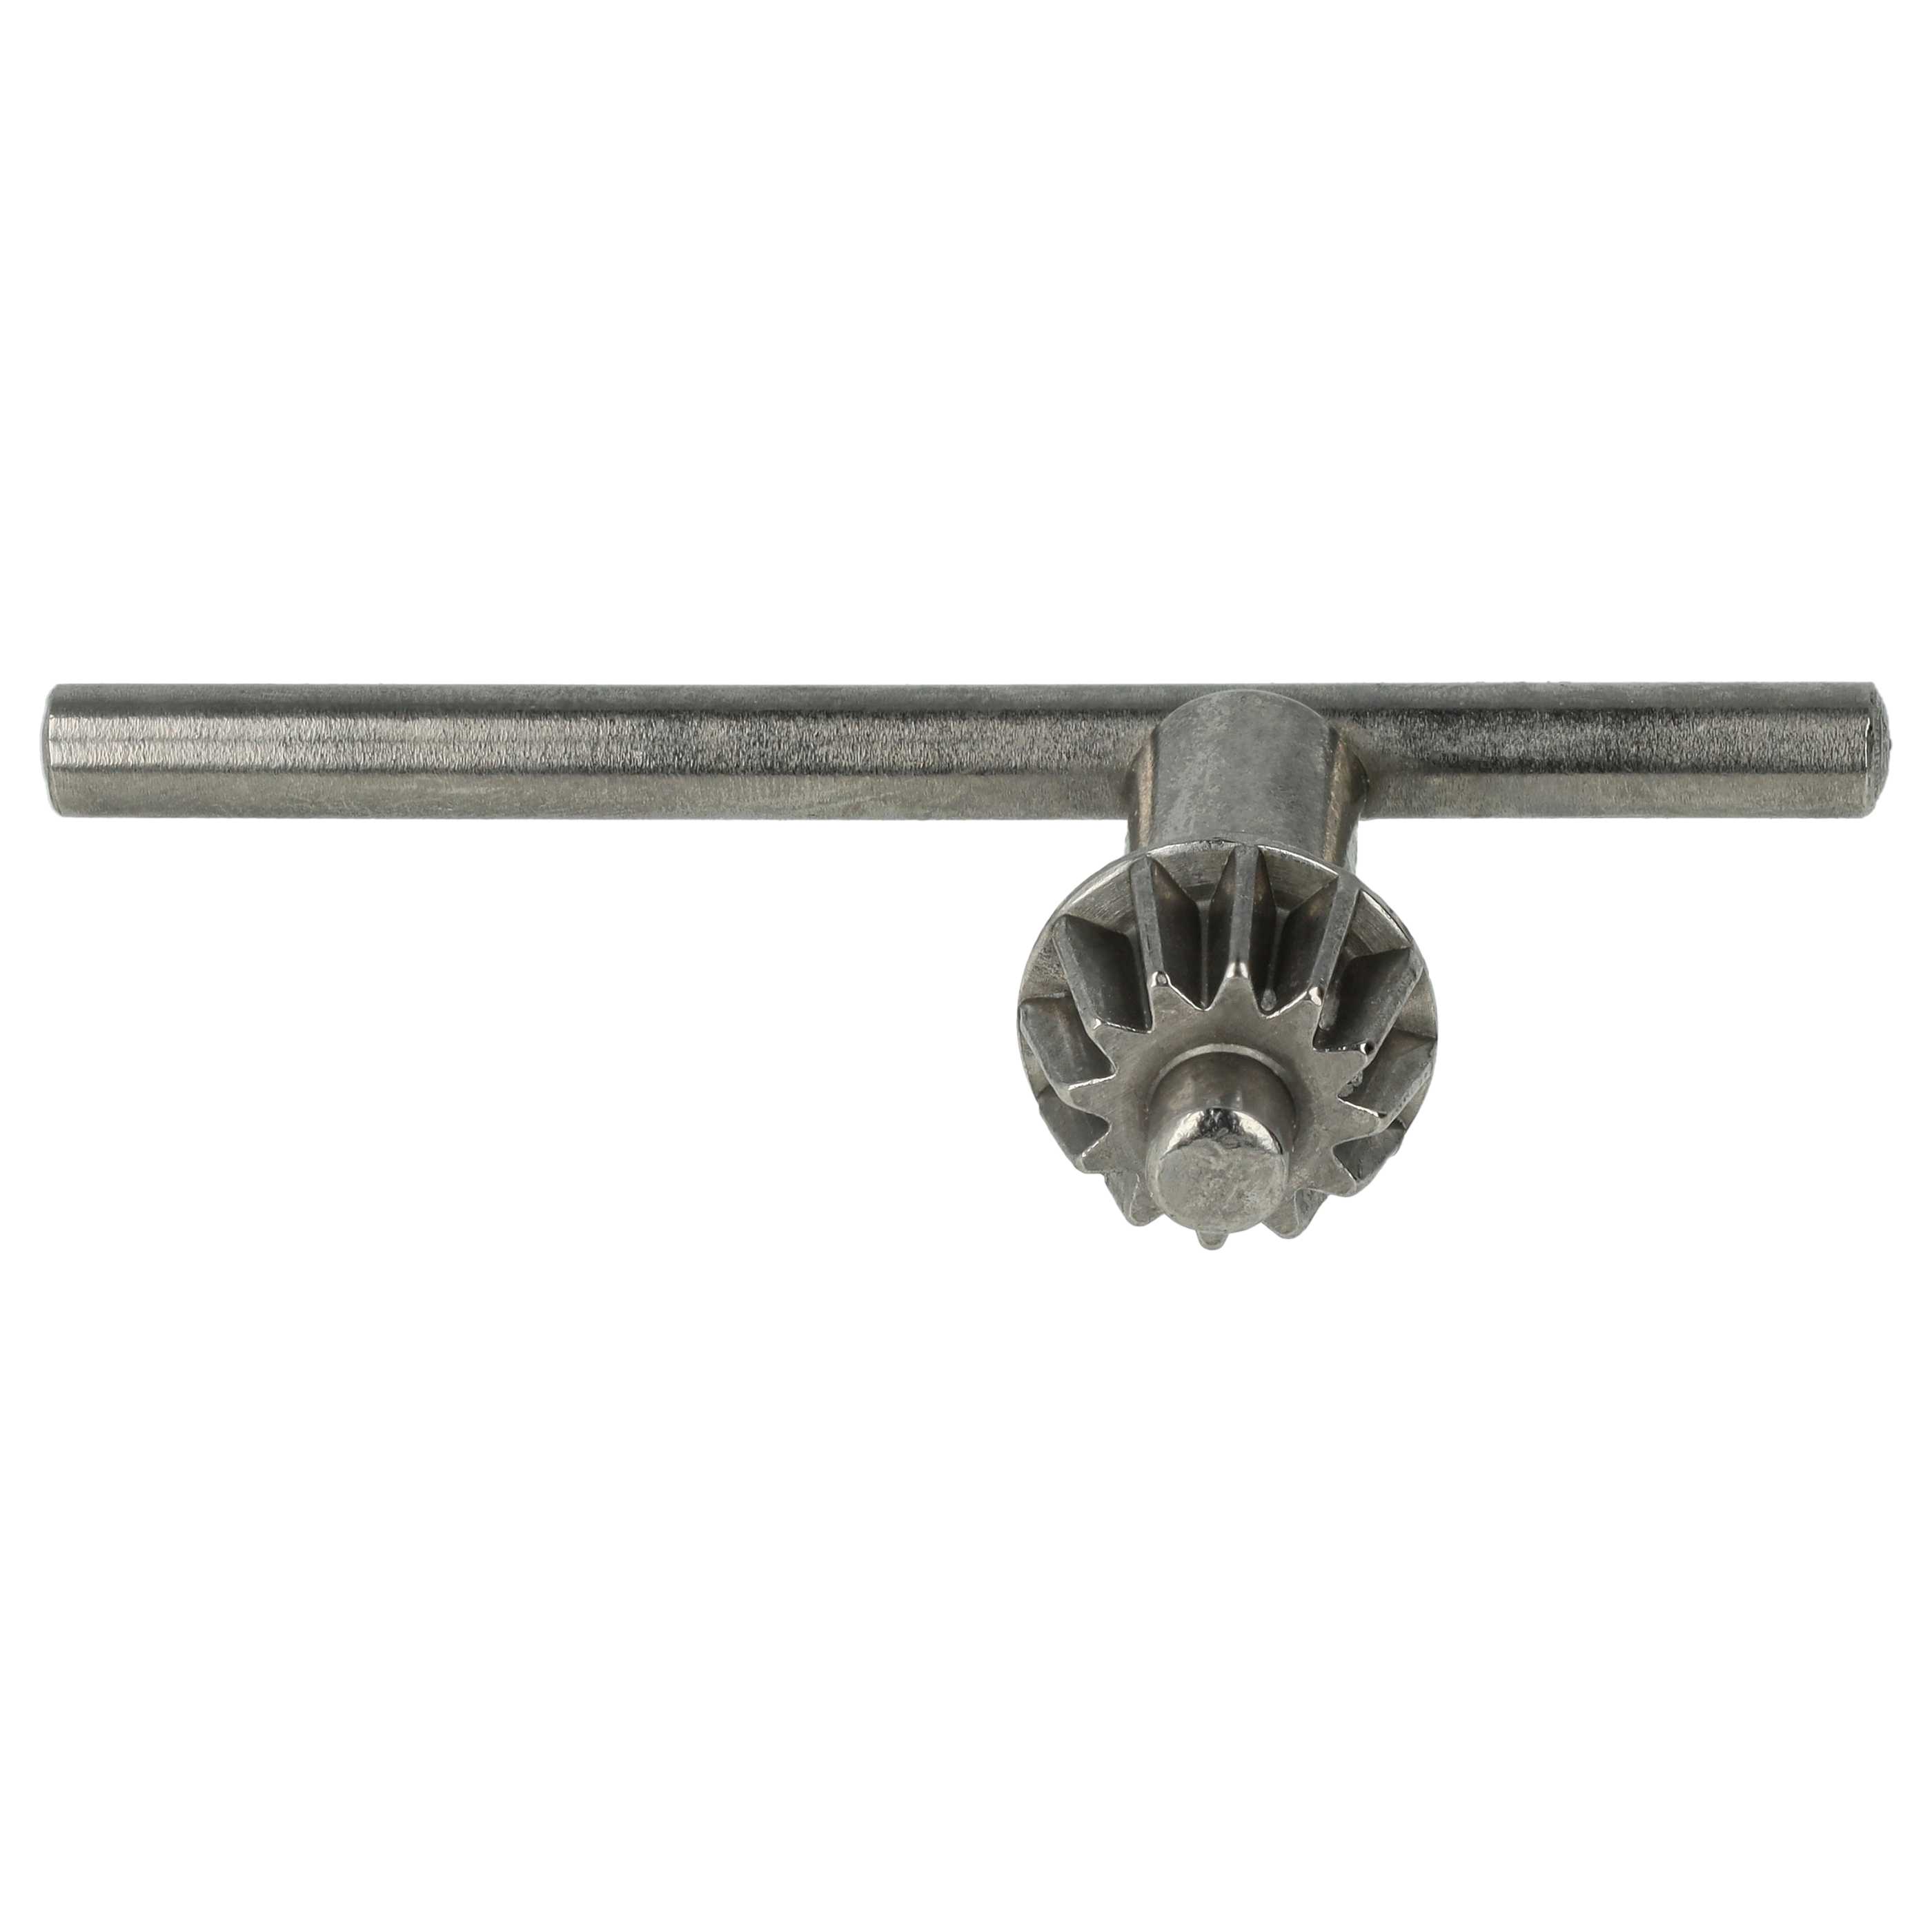 2x Drill Chuck Key S2A 10-13mm replaces Wolfcraft 2630000 for Drills from e.g. Metabo, AEG